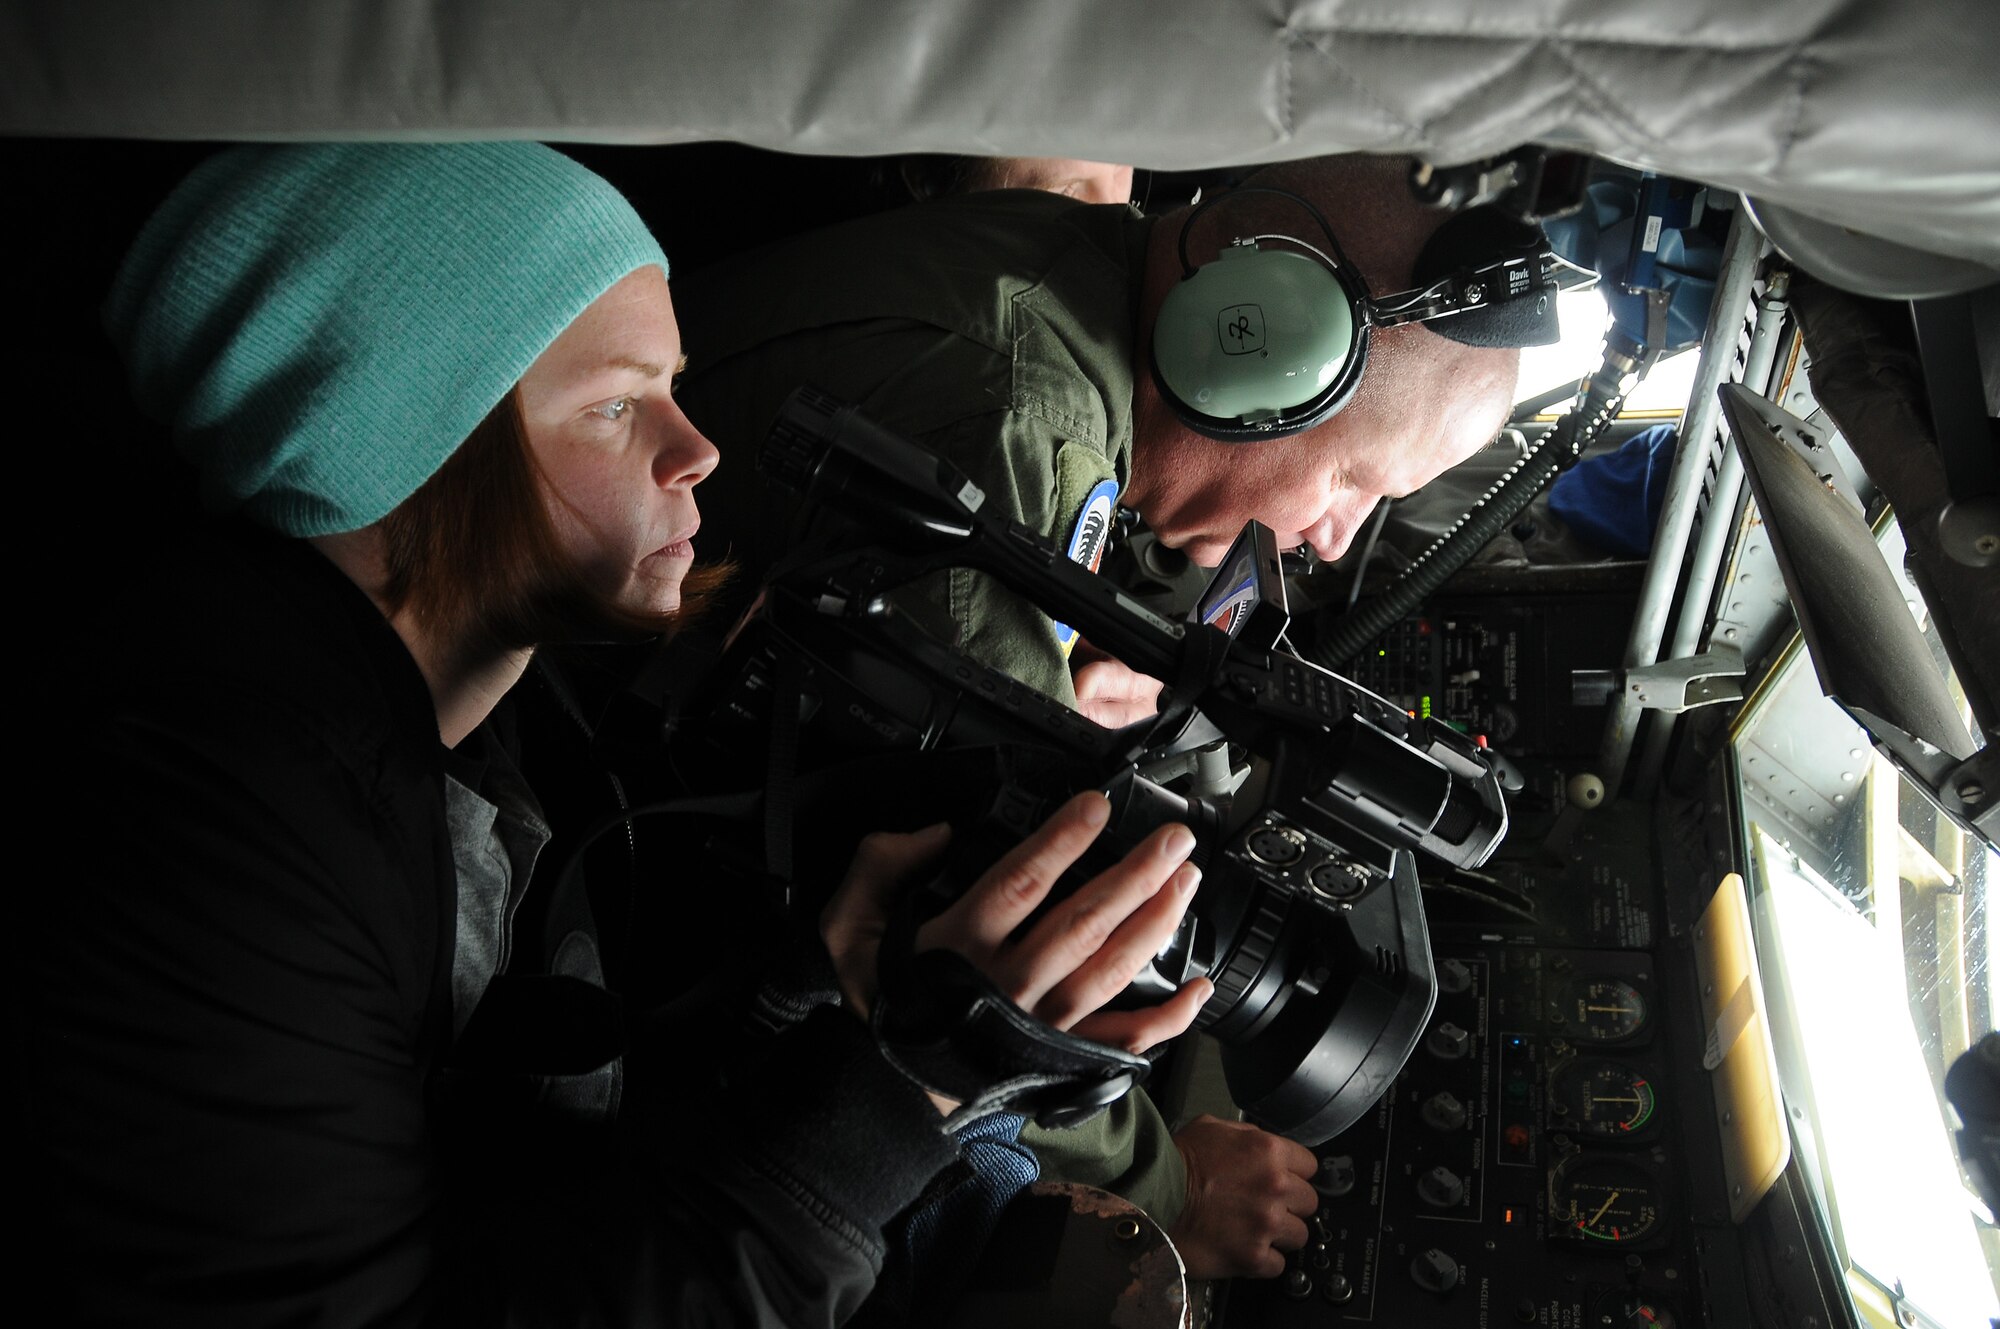 Photographer, Leah Schwartz from Sioux City, Iowa television station KTIV, photographs a mid-air refueling from the boom operator’s window alongside Chief Master Sgt. Al Mast in the back of an Air Force KC-135. Mast is the “Chief Boom” with the 185th Air Refueling Wing, Iowa Air National Guard based in Sioux City, Iowa. (U.S. Air National Guard photo by Master Sgt. Vincent De Groot/Released)